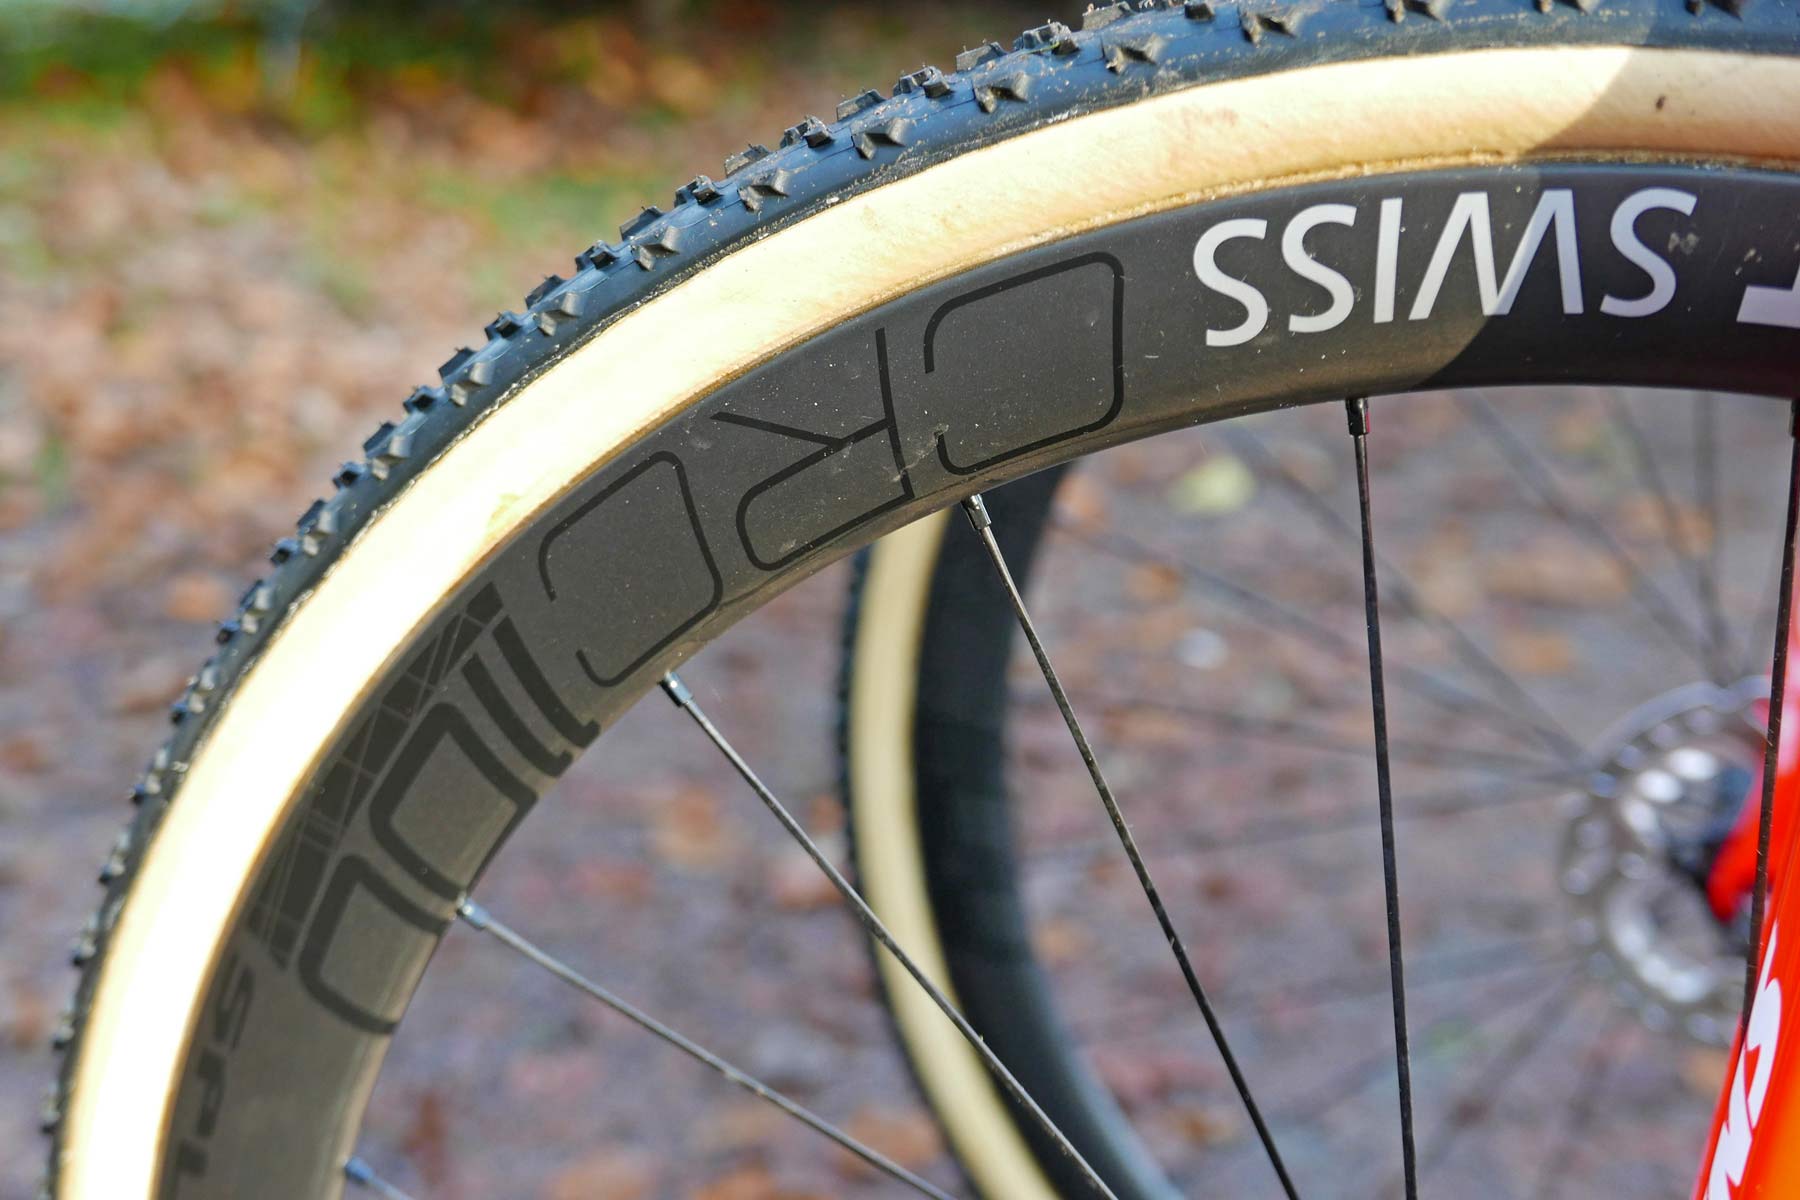 CX Tech: New, wider DT Swiss CRC 1100 carbon tubular cyclocross wheels spotted